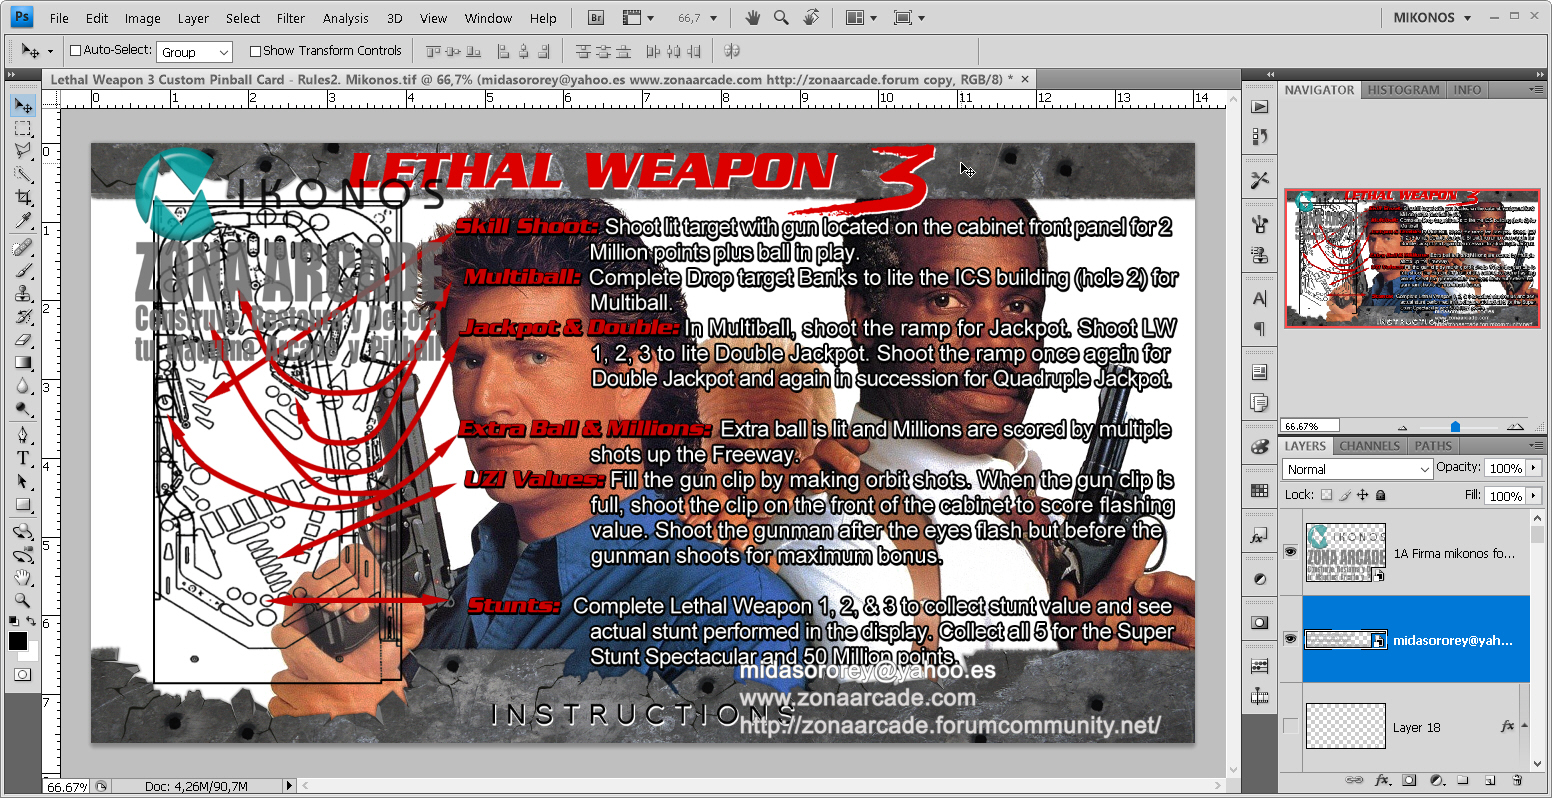 Lethal Weapon 3%20Custom%20Pinball%20Card%20-%20Rules2.%20Mikonos1